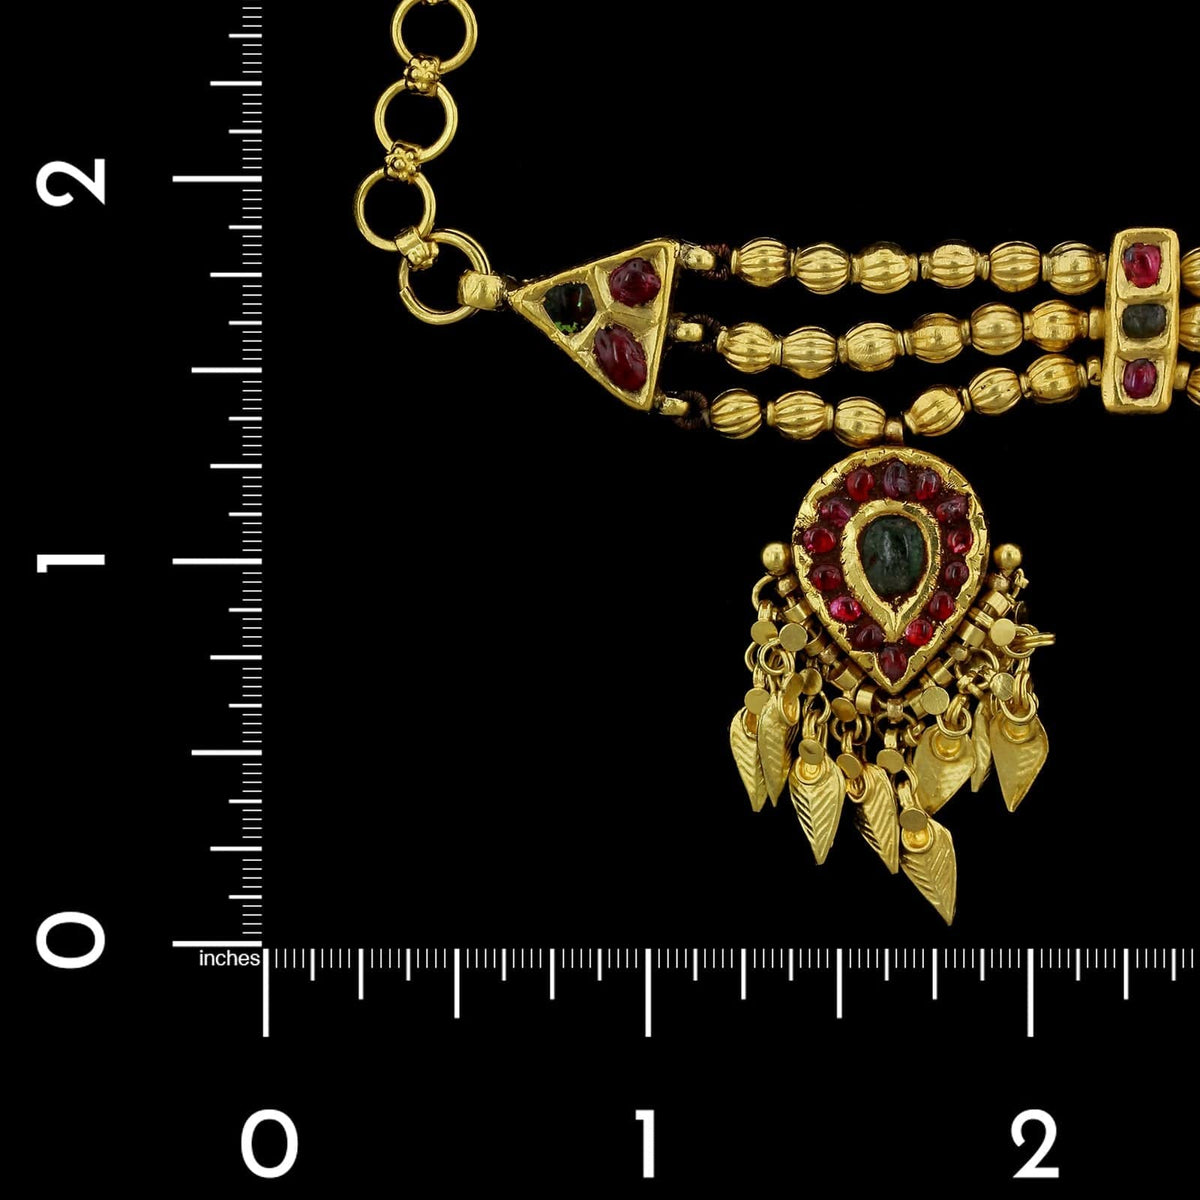 22Kt Traditional Gold Ruby Necklace Set